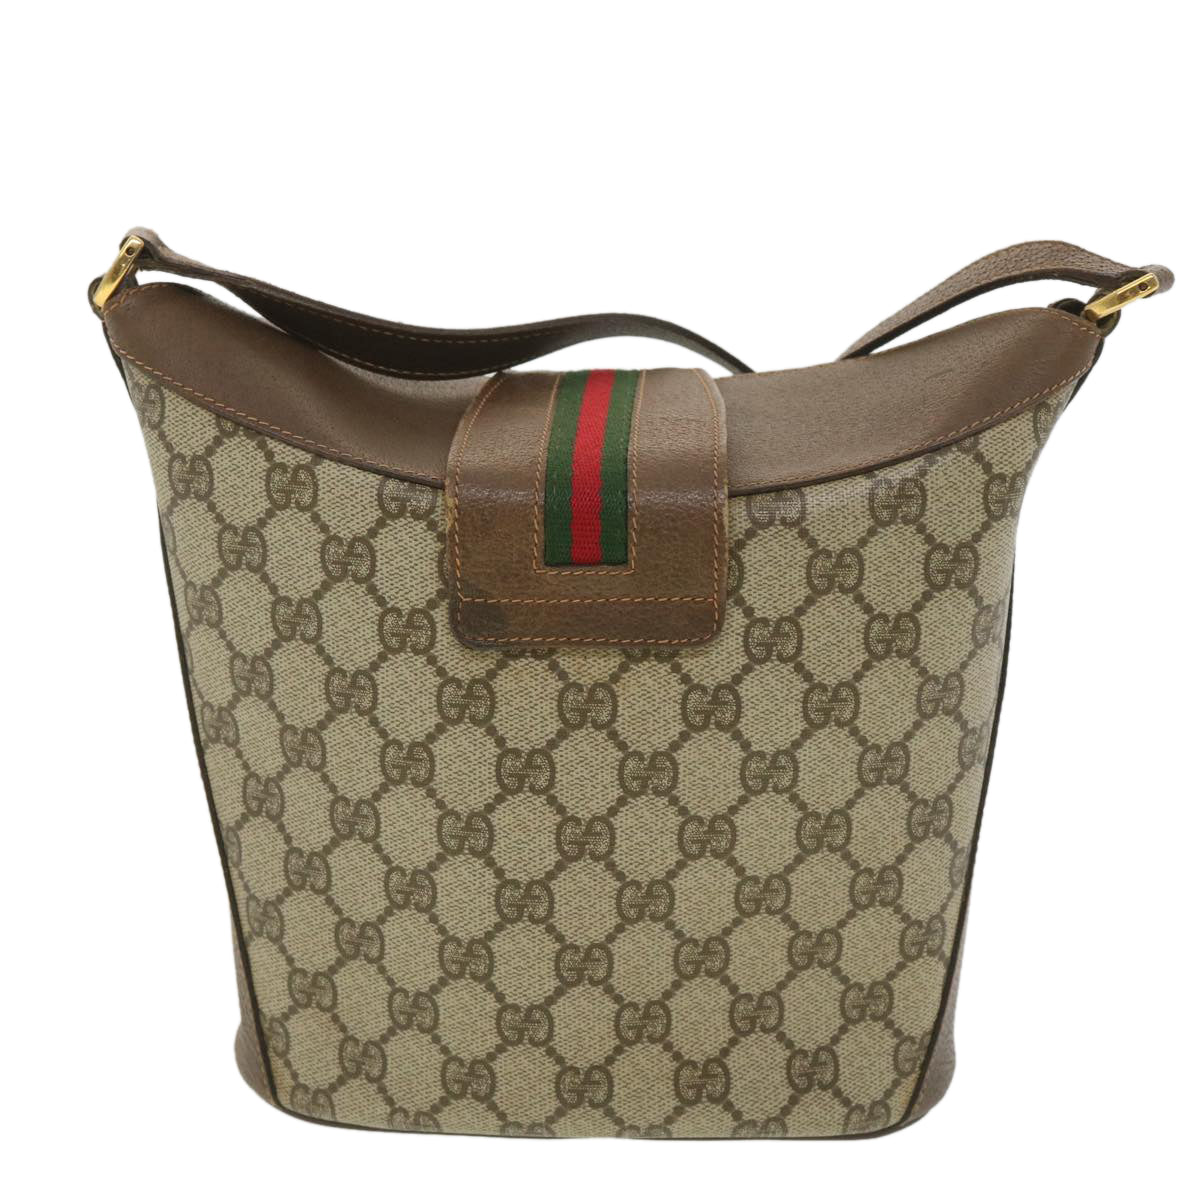 GUCCI GG Canvas Web Sherry Line Shoulder Bag Beige Red 40.02.081 Auth 38486 - 0